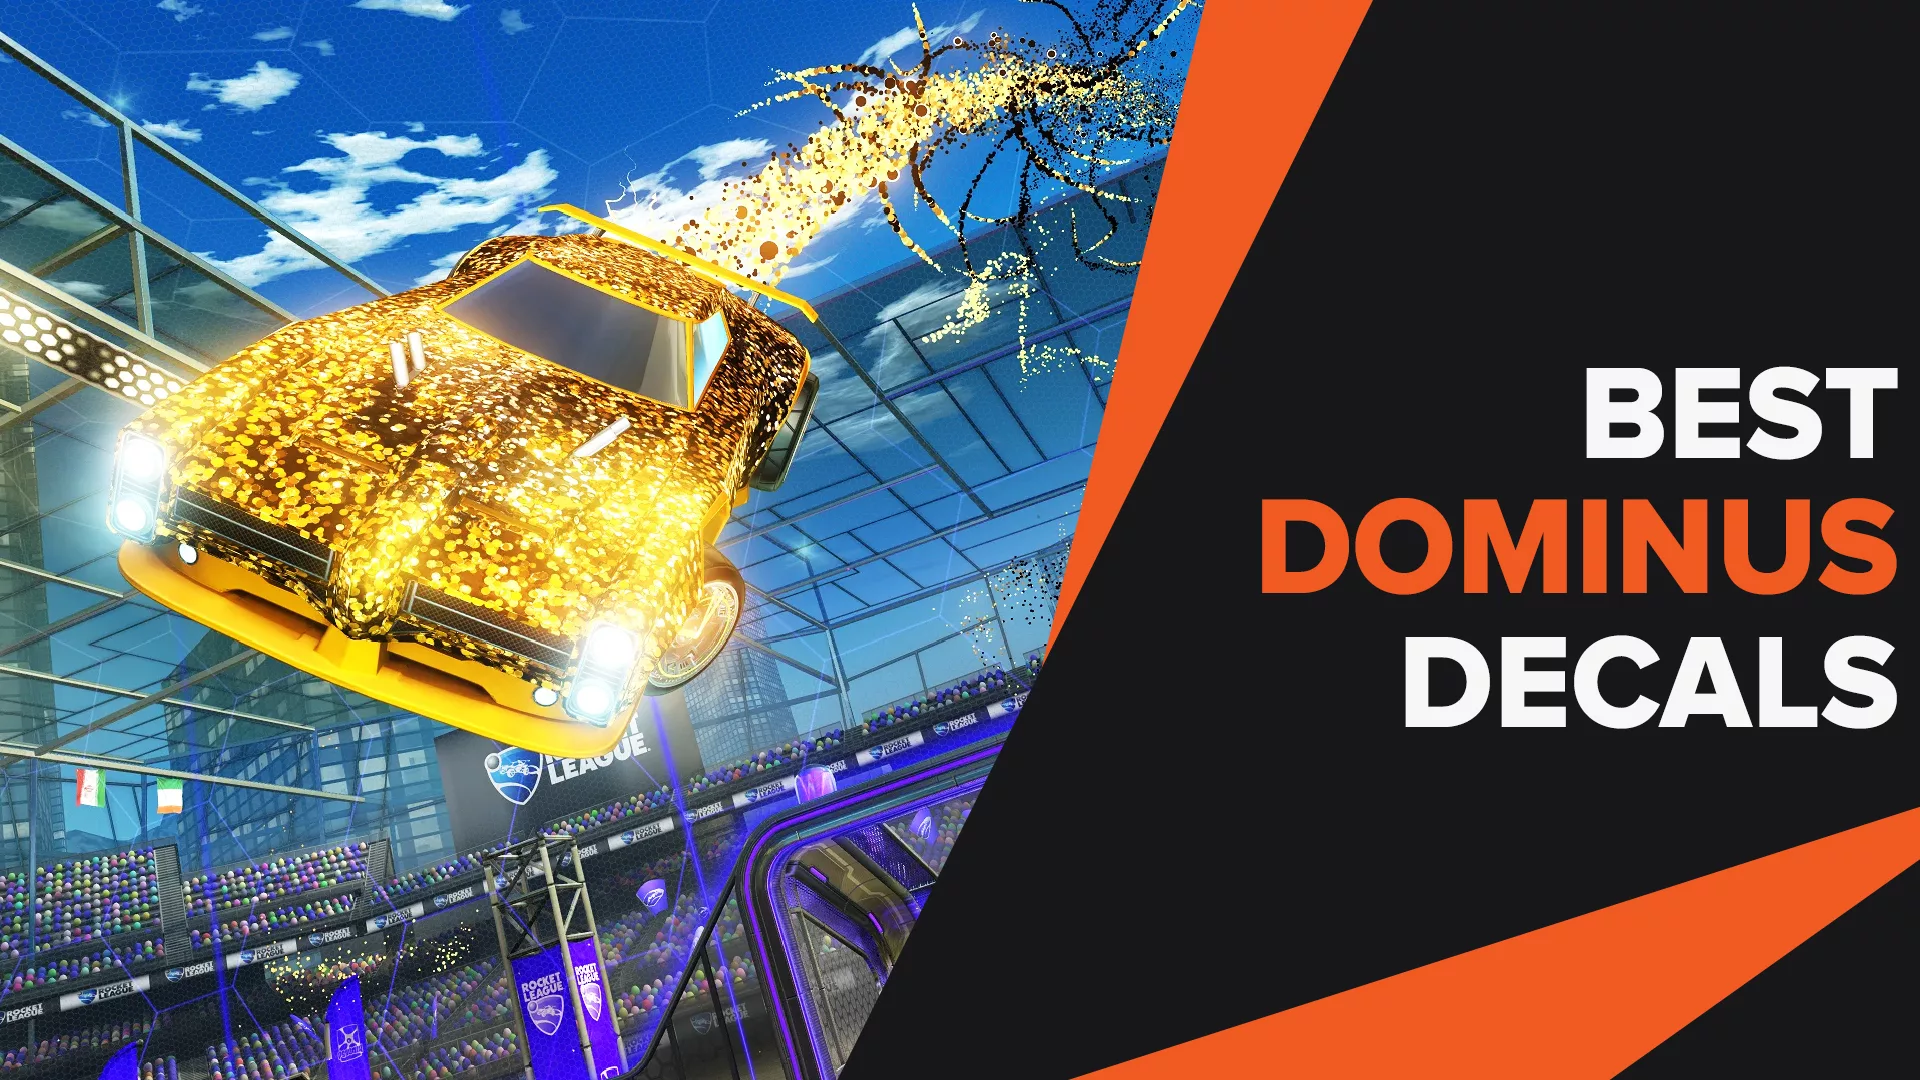 Best Dominus decals rocket league that will make you outshine your competition!